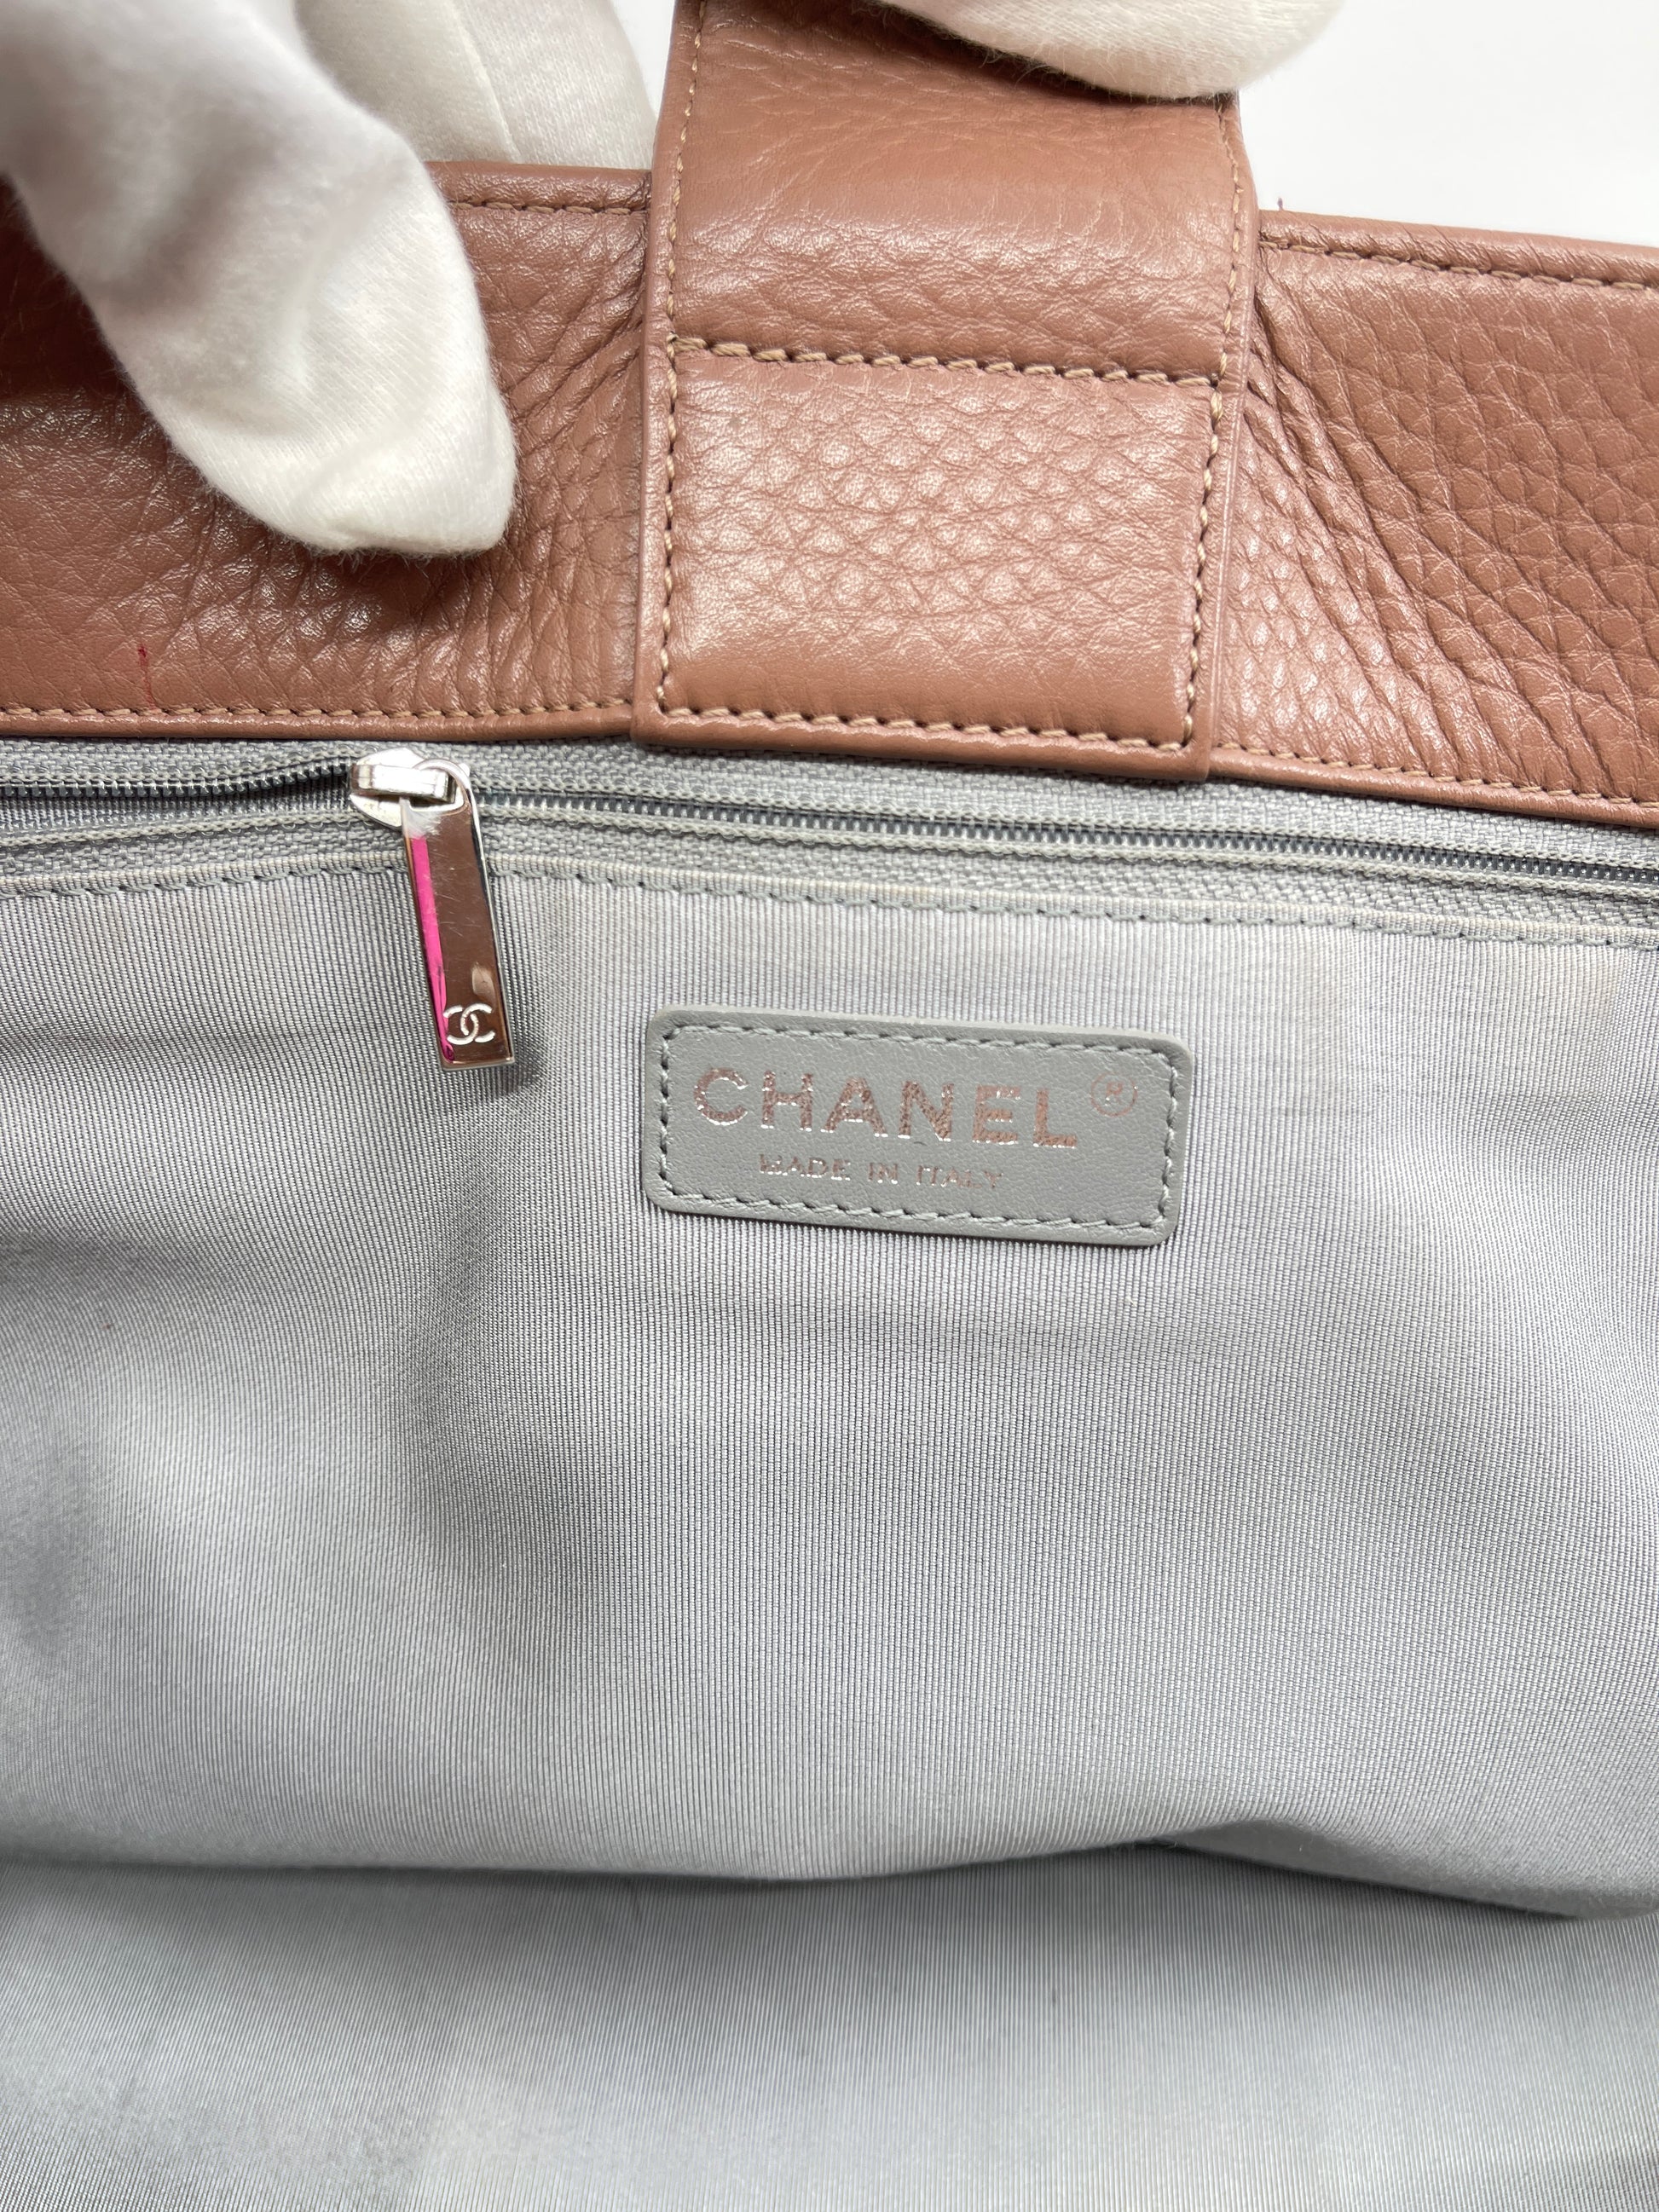 CHANEL CERF EXECUTIVE LEATHER TOTE – RE-LUXRY